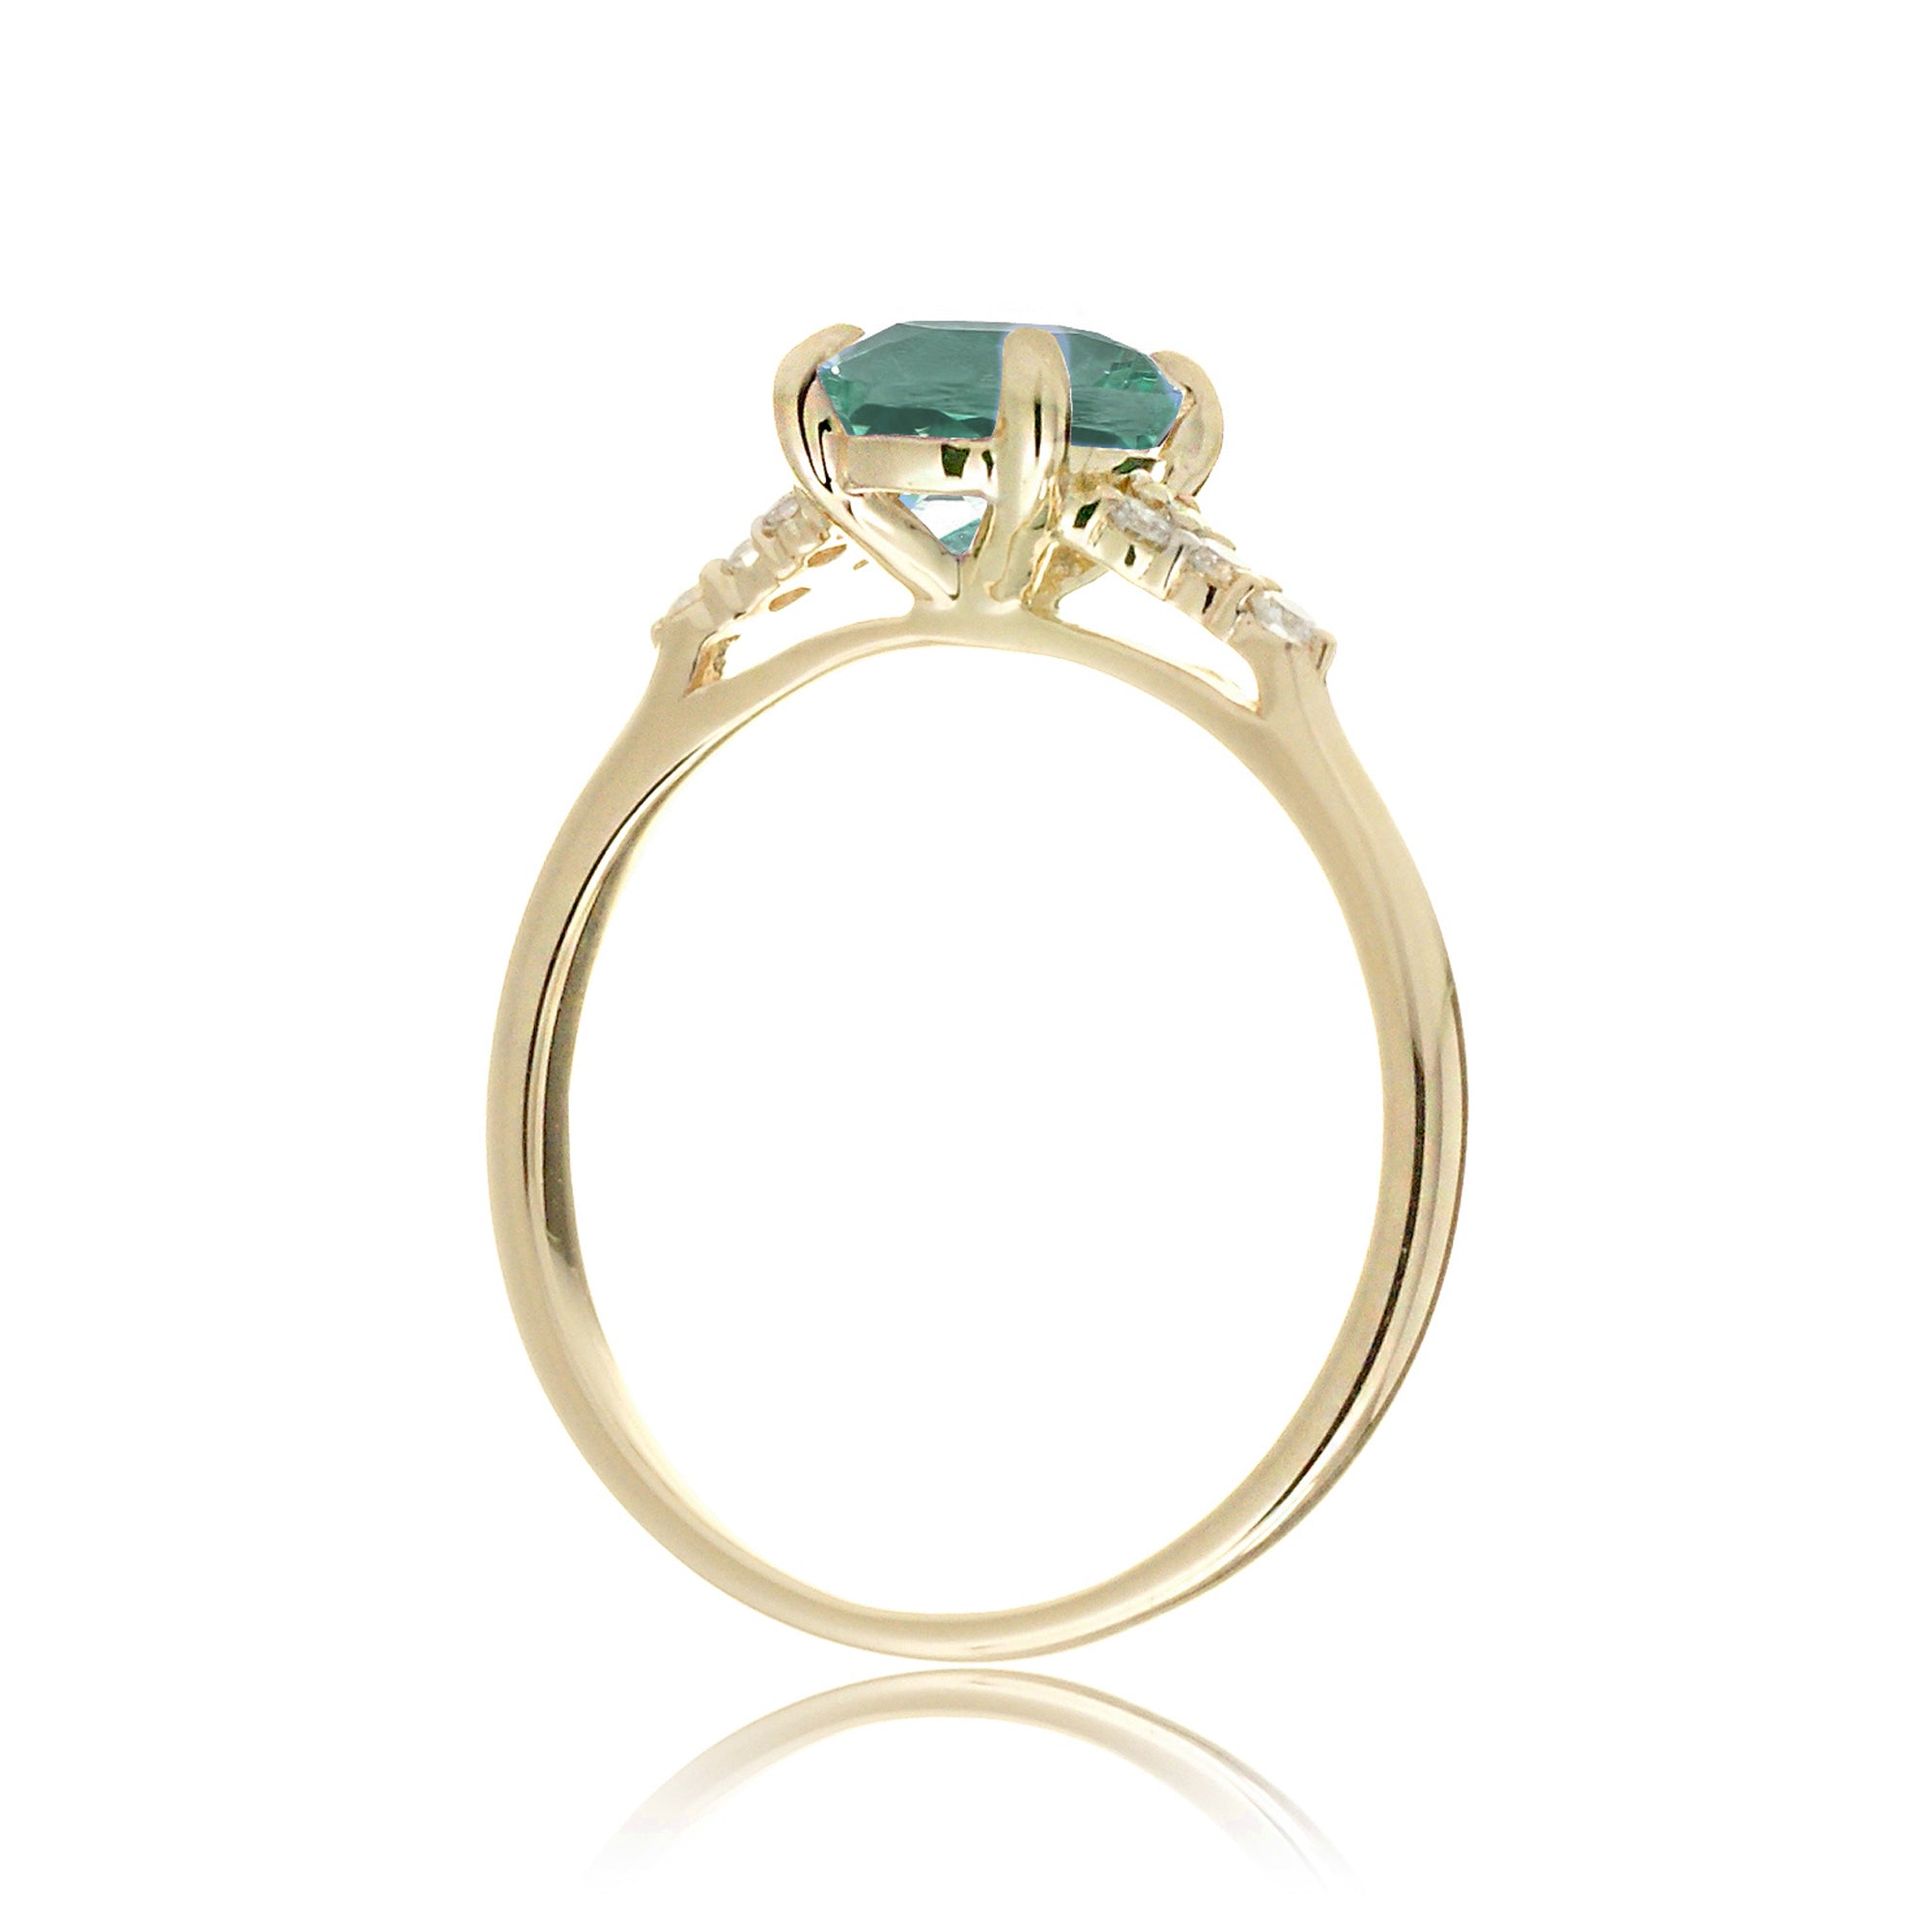 Pear cut green sapphire and diamond engagement ring in yellow gold - the Chloe lab-grown